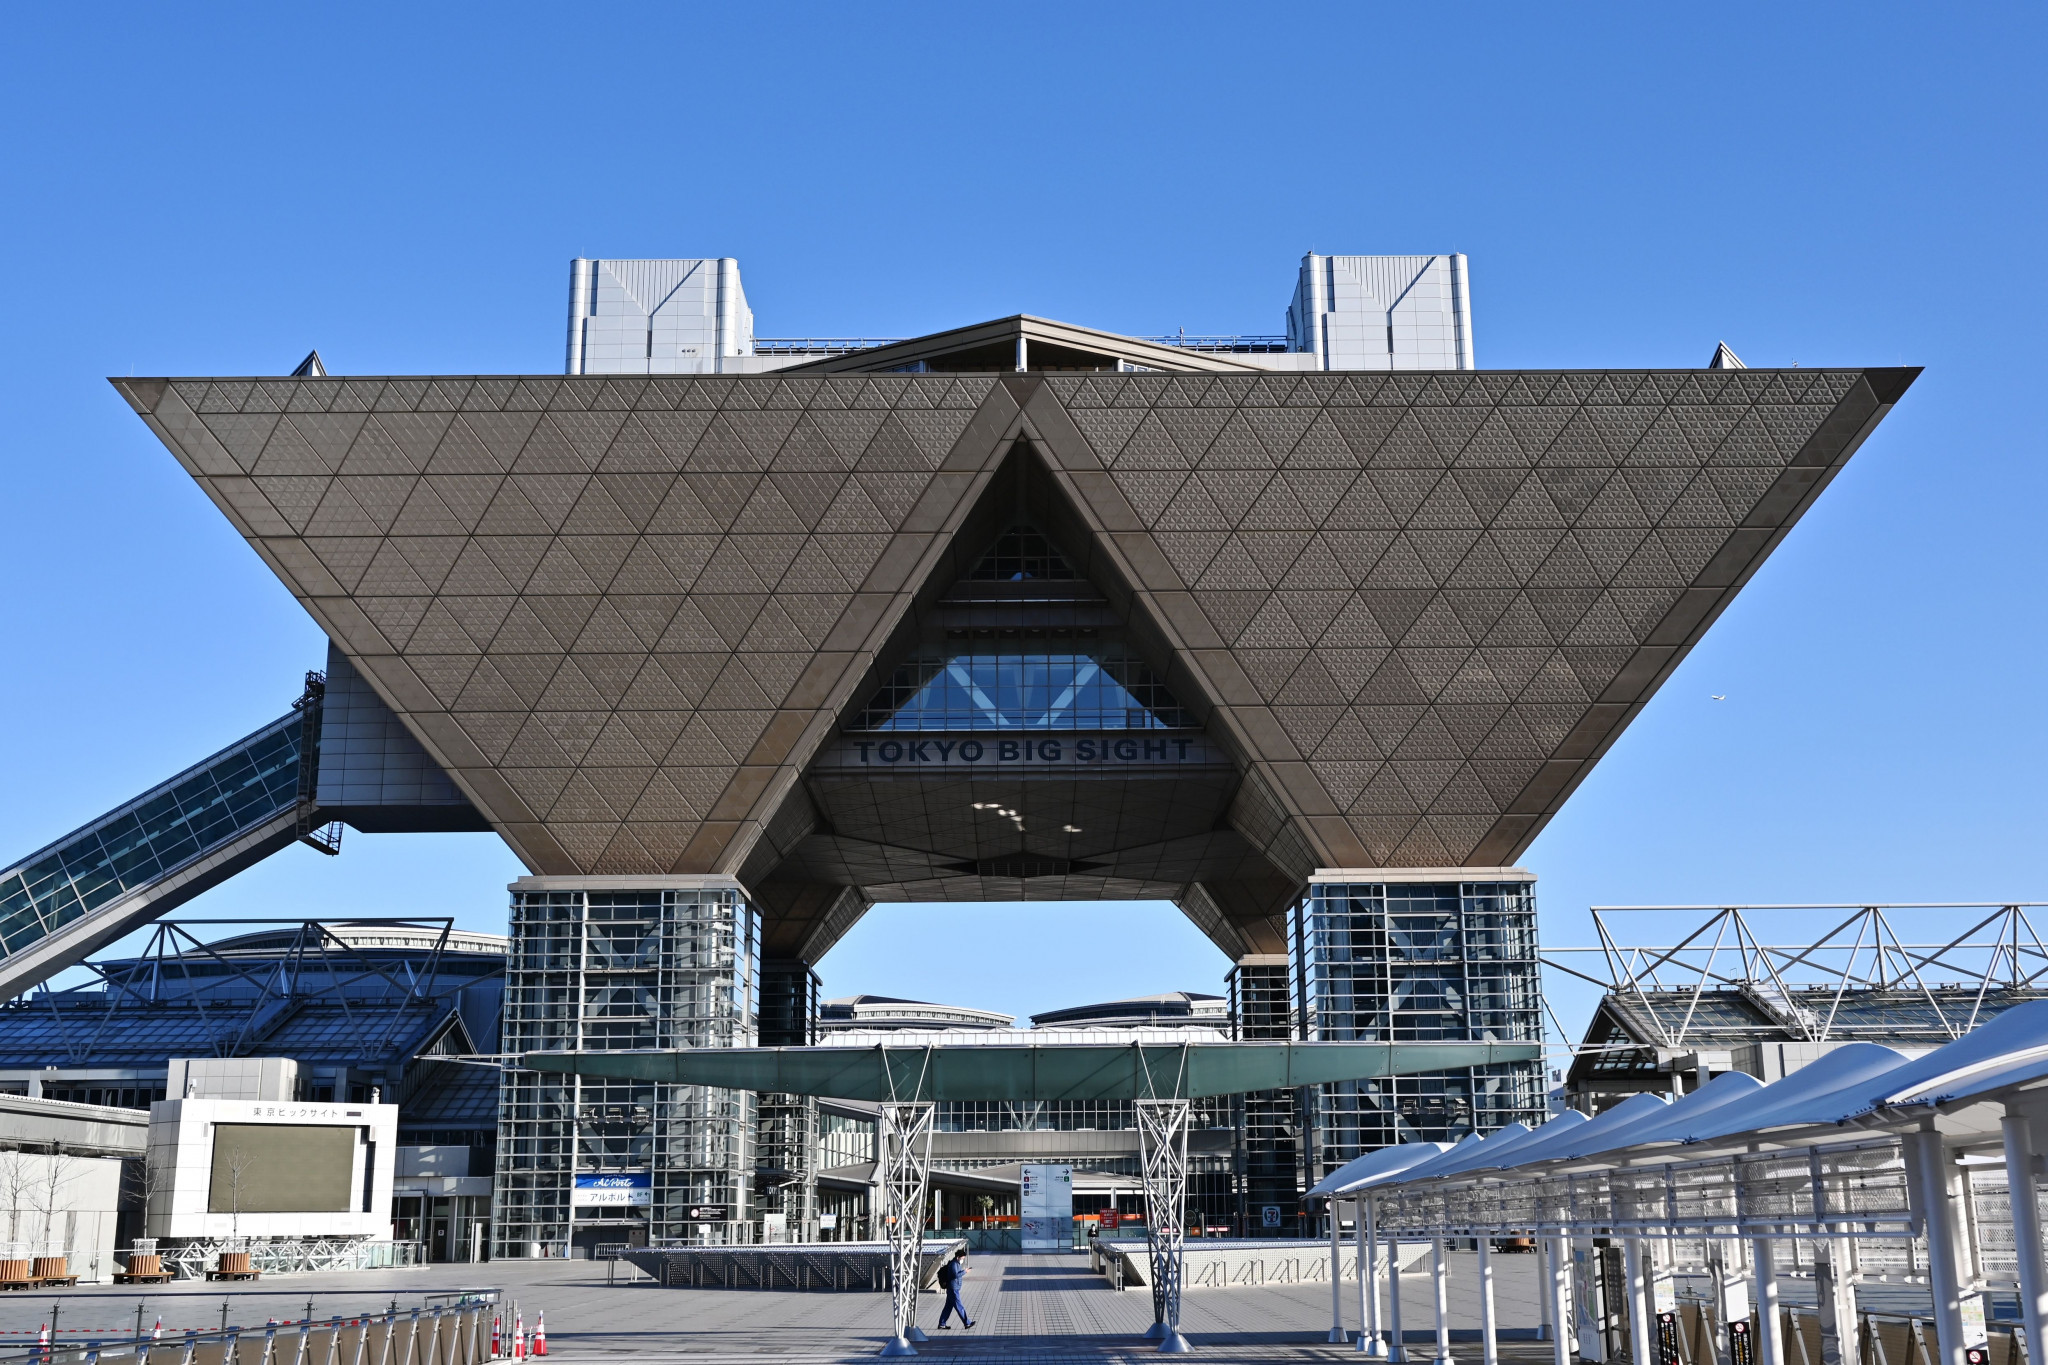 Tokyo Big Sight is among the venues still under negotiations ©Getty Images